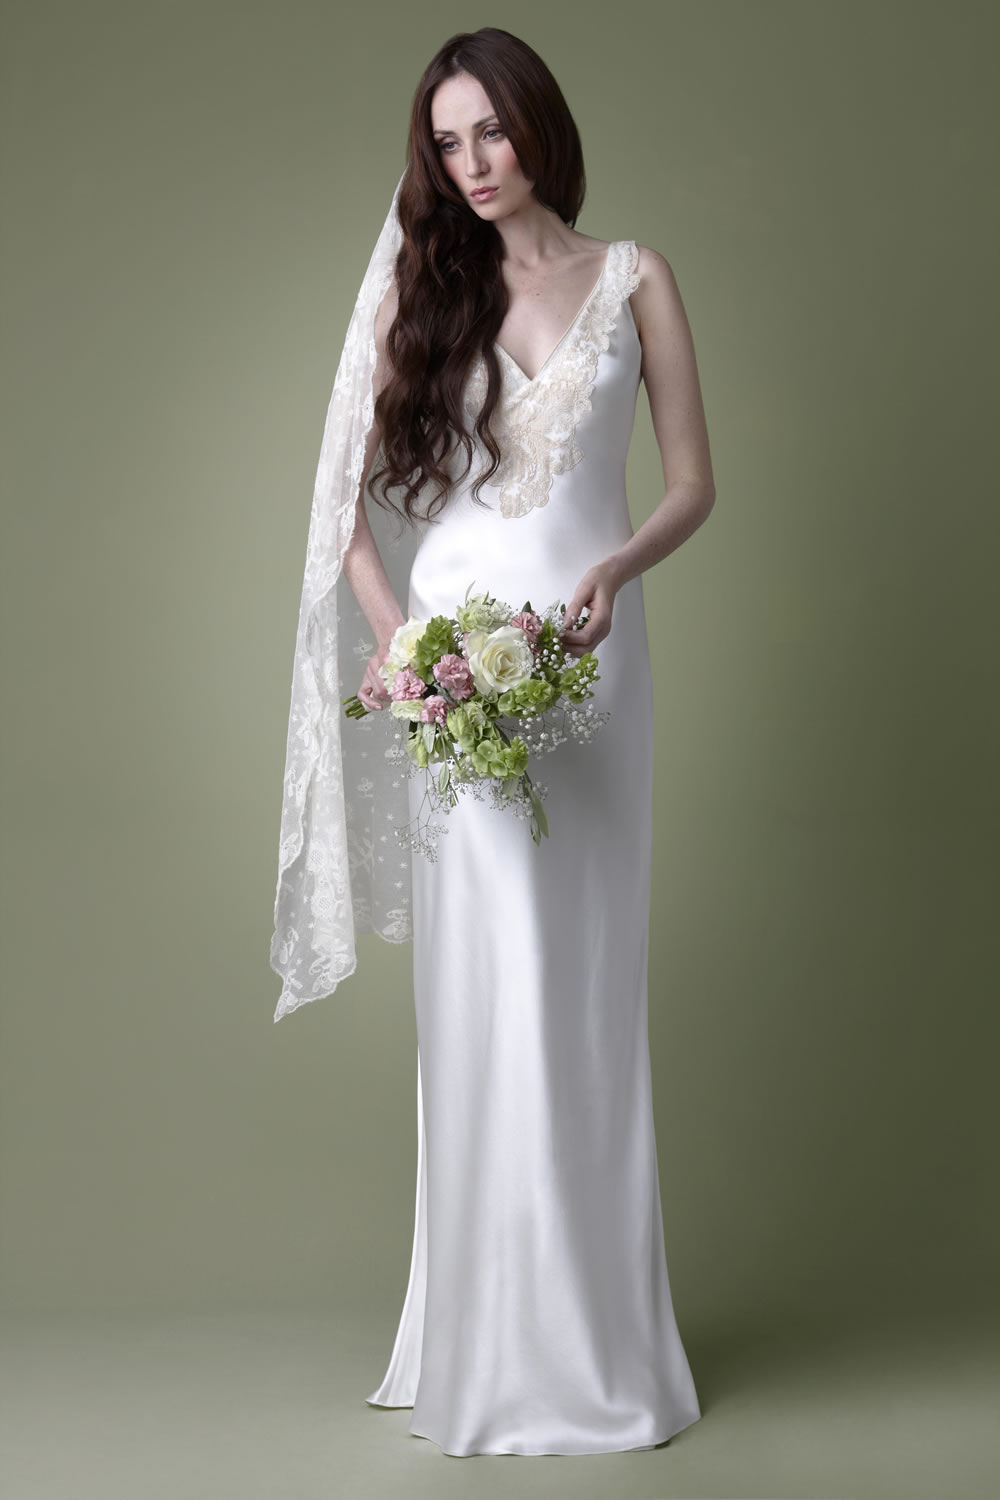  of experience in fashion to create The Vintage Wedding Dress Company 